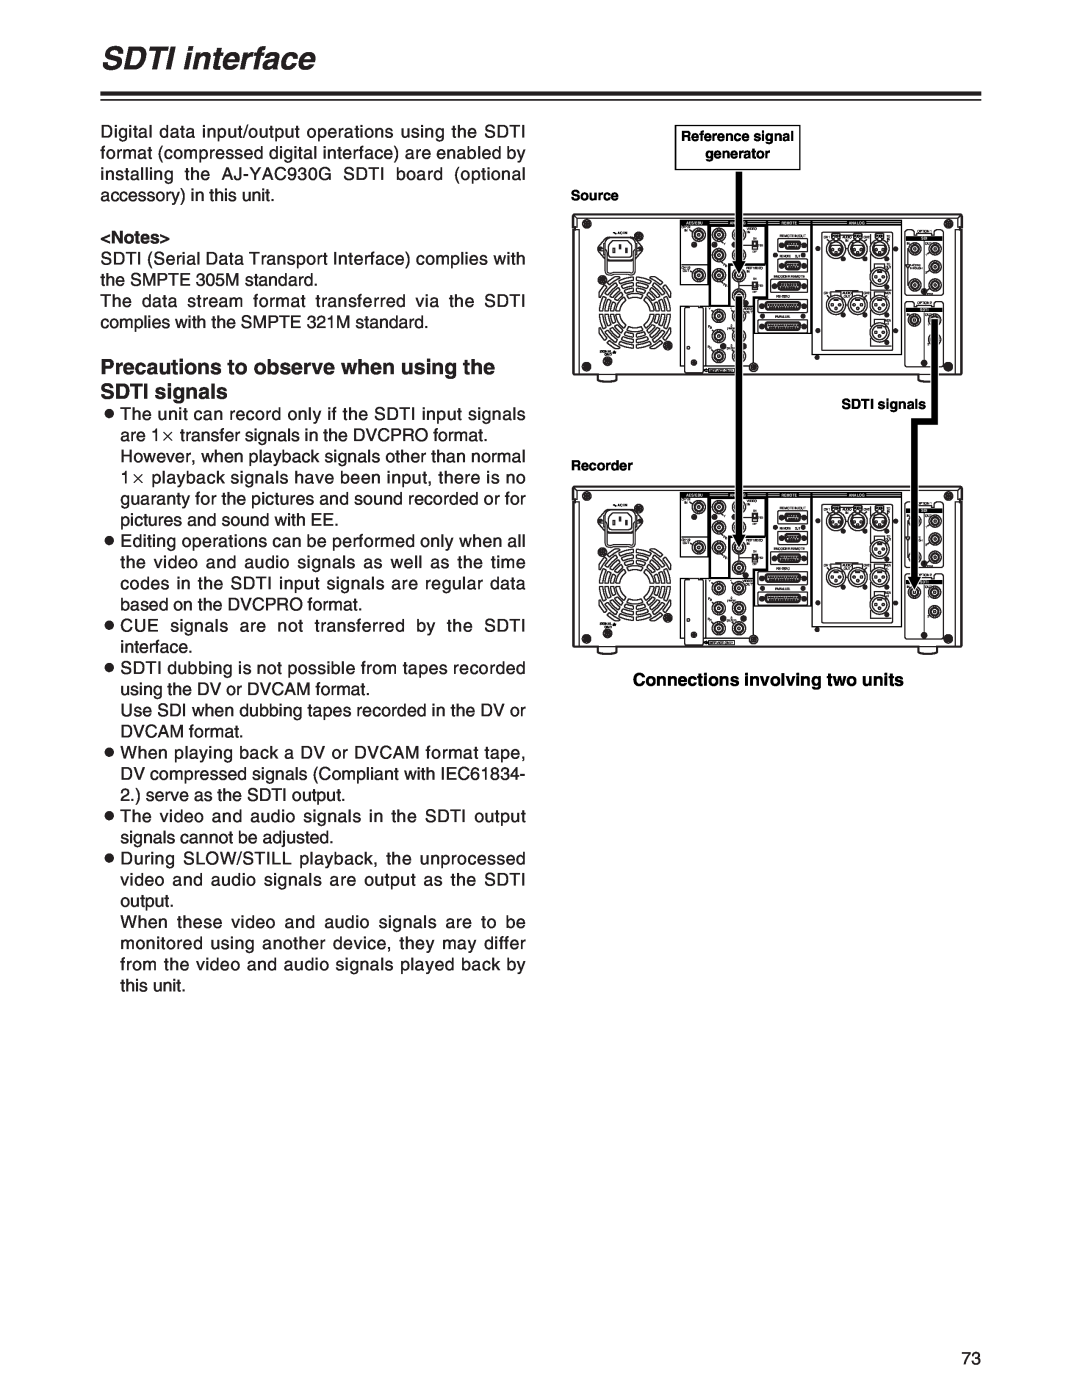 Panasonic AJ-SD755 SDTI interface, Precautions to observe when using the SDTI signals, Connections involving two units 